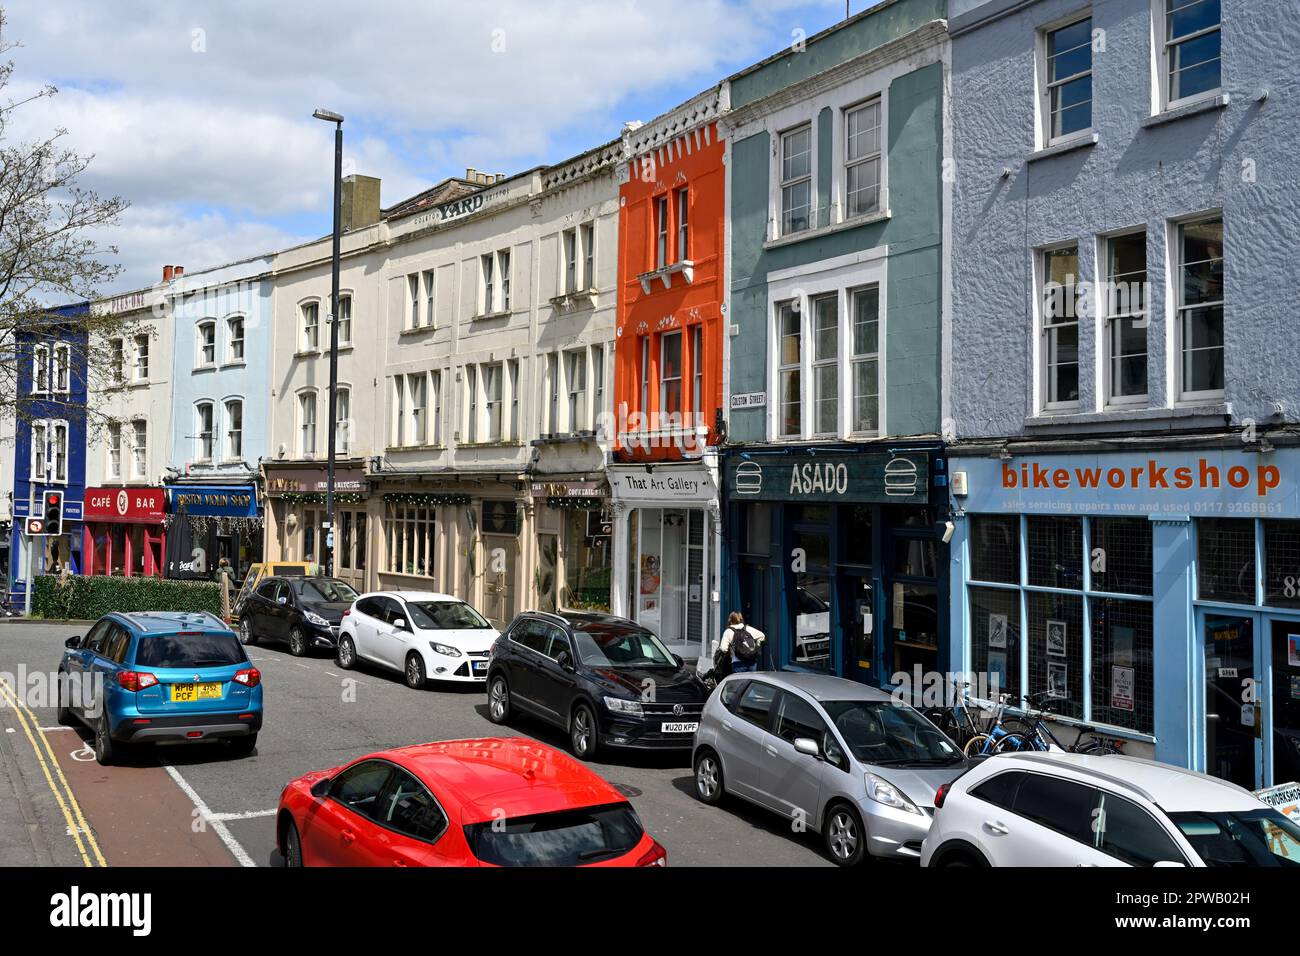 Shopping high street with small independent retail shops, St Michaels, Bristol, UK Stock Photo